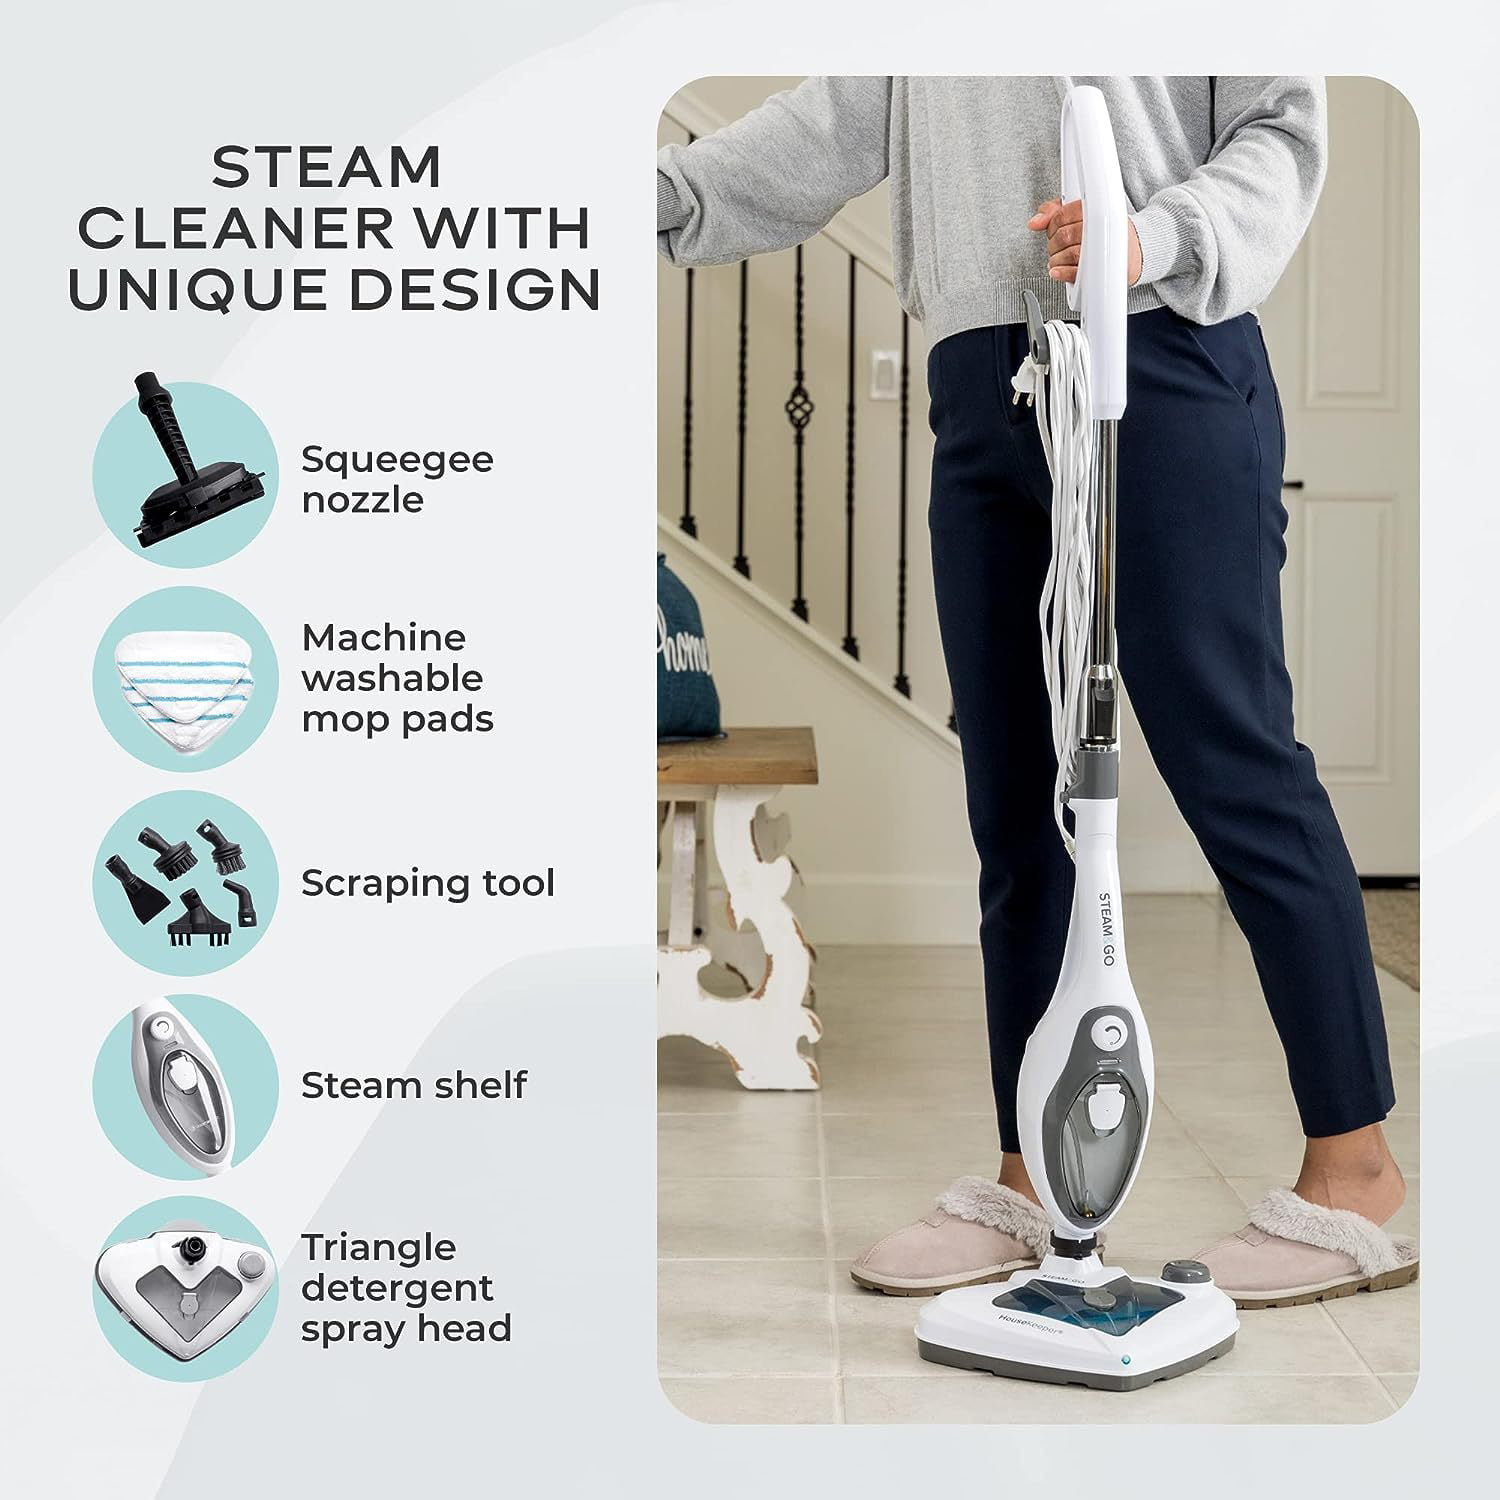  Steam Mop - 10-in-1 MultiPurpose Handheld Steam Cleaner  Detachable Floor Steamer for Hardwood/Tile/Laminate Floors Carpet with 11  Accessories for Whole Home Use.